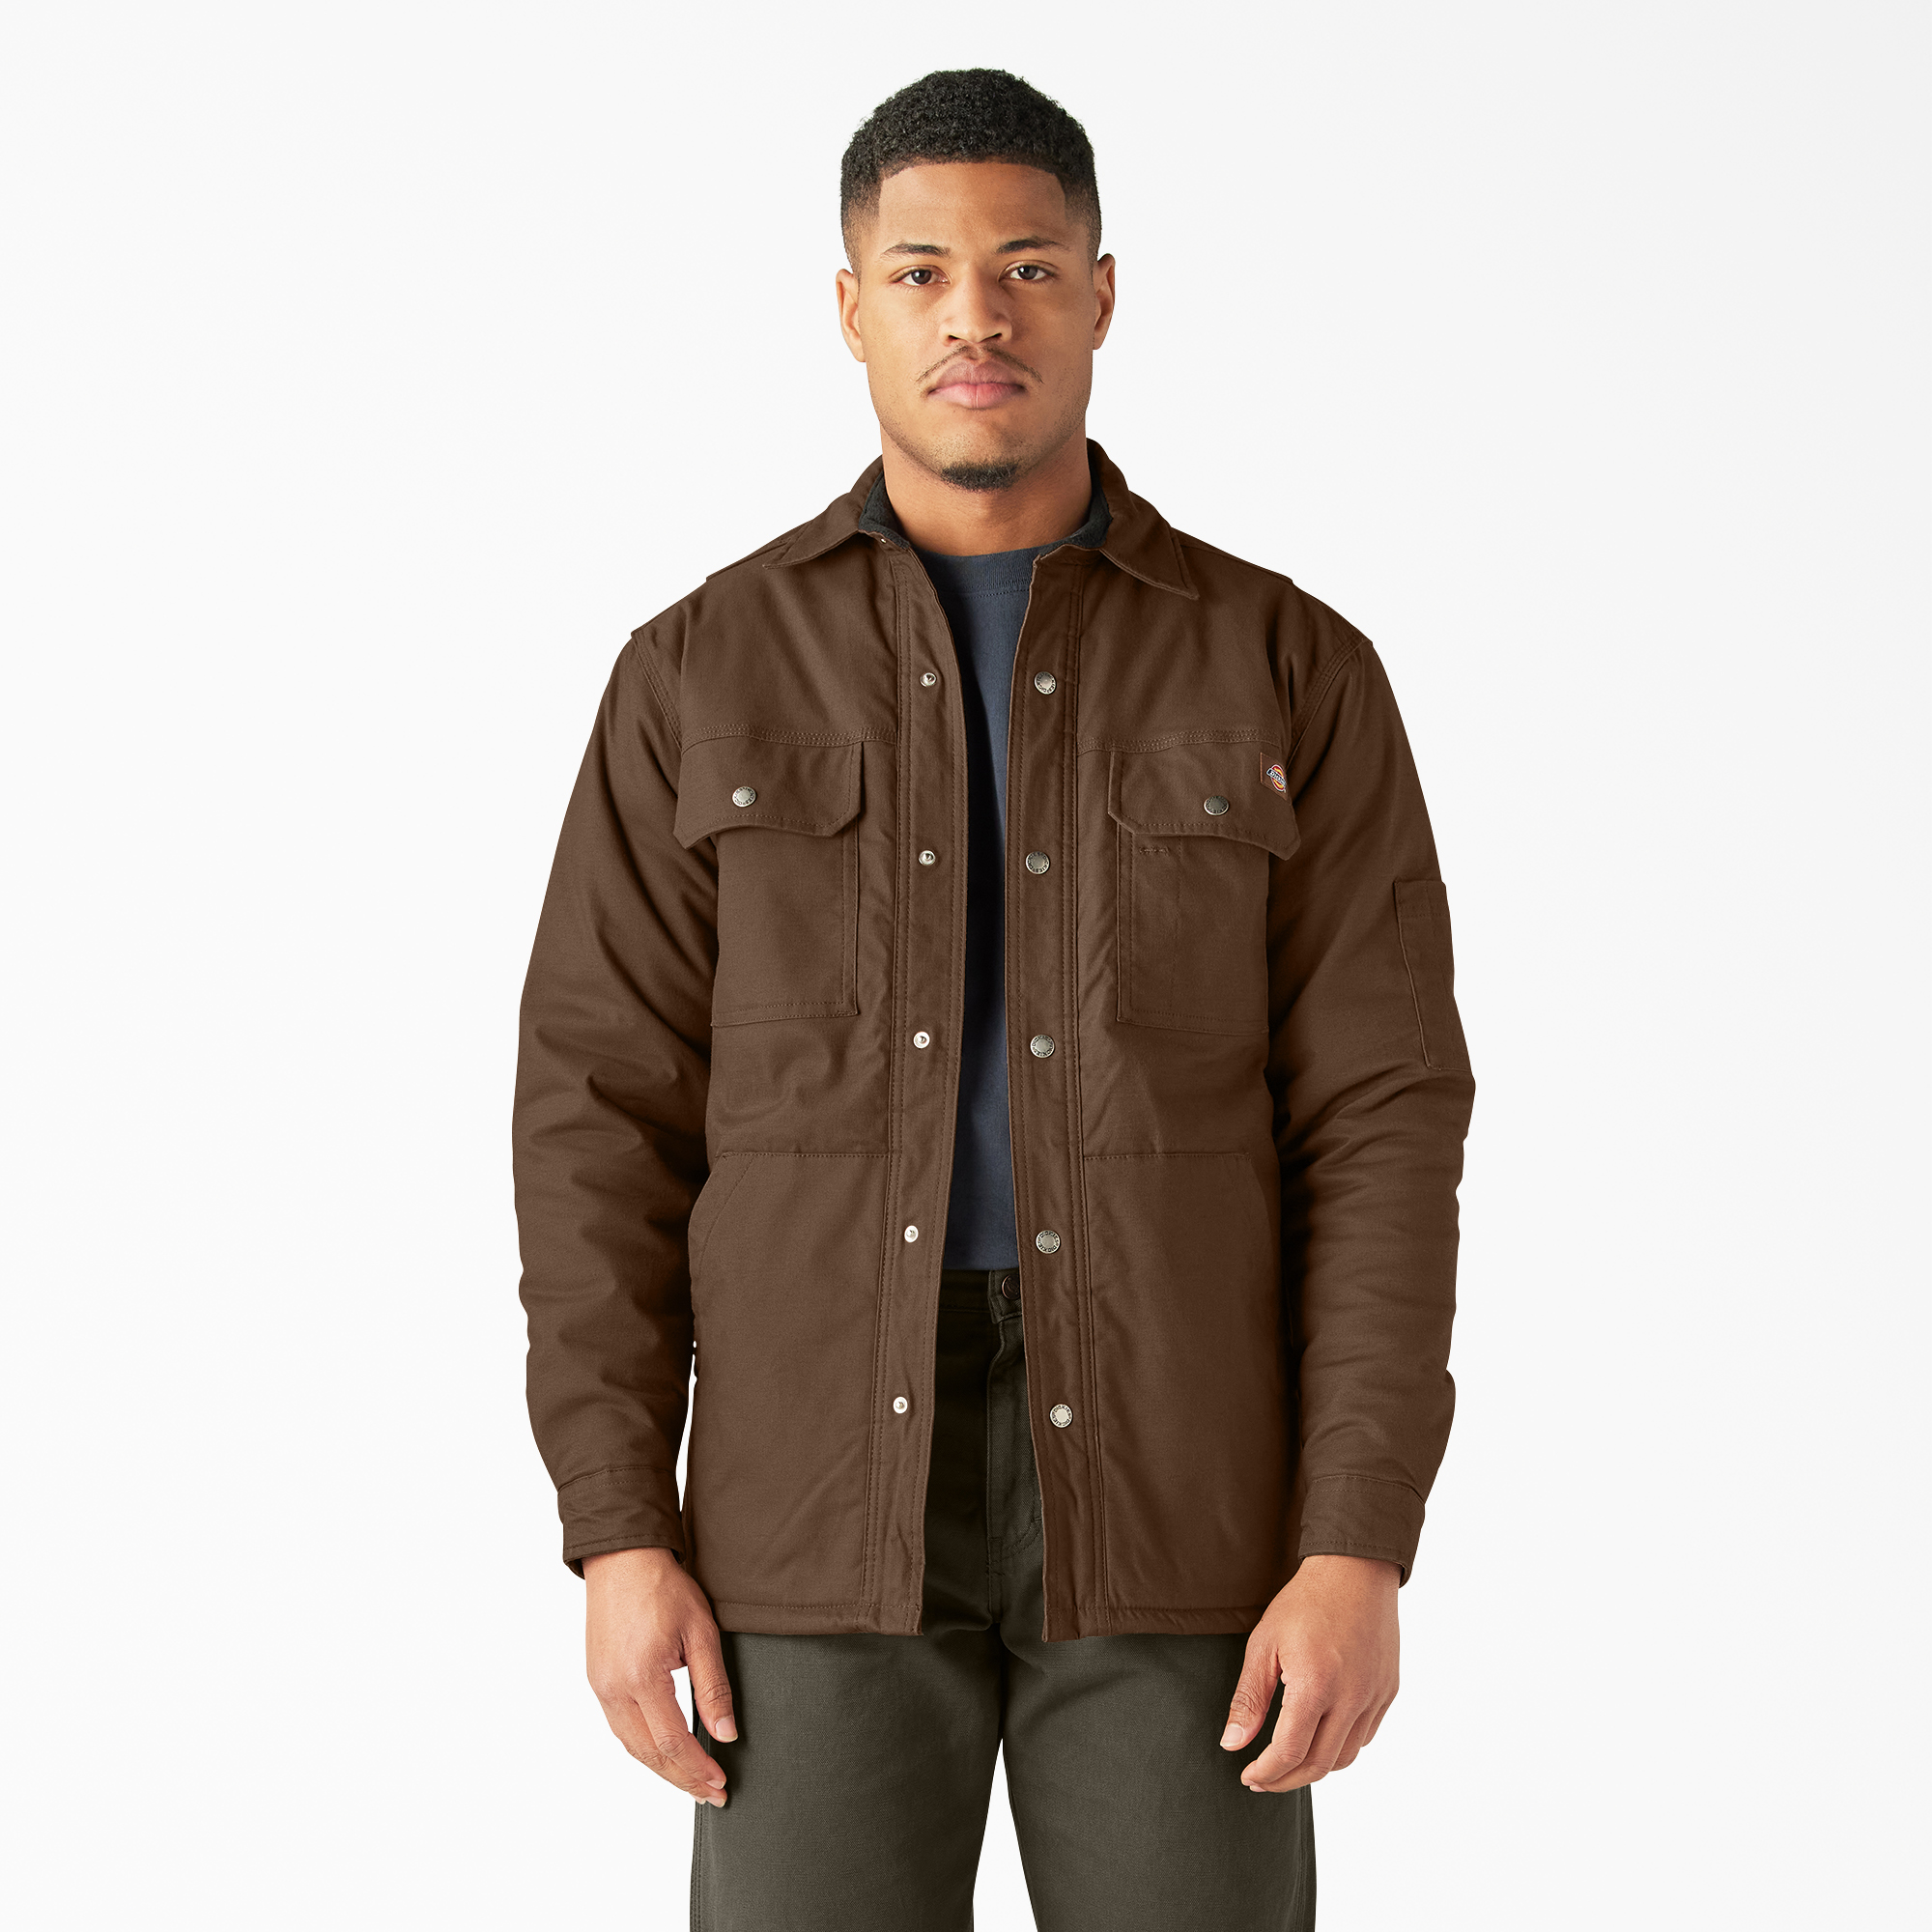 FLEX Duck Shirt Jacket with Hydroshield - Timber Brown (TB)